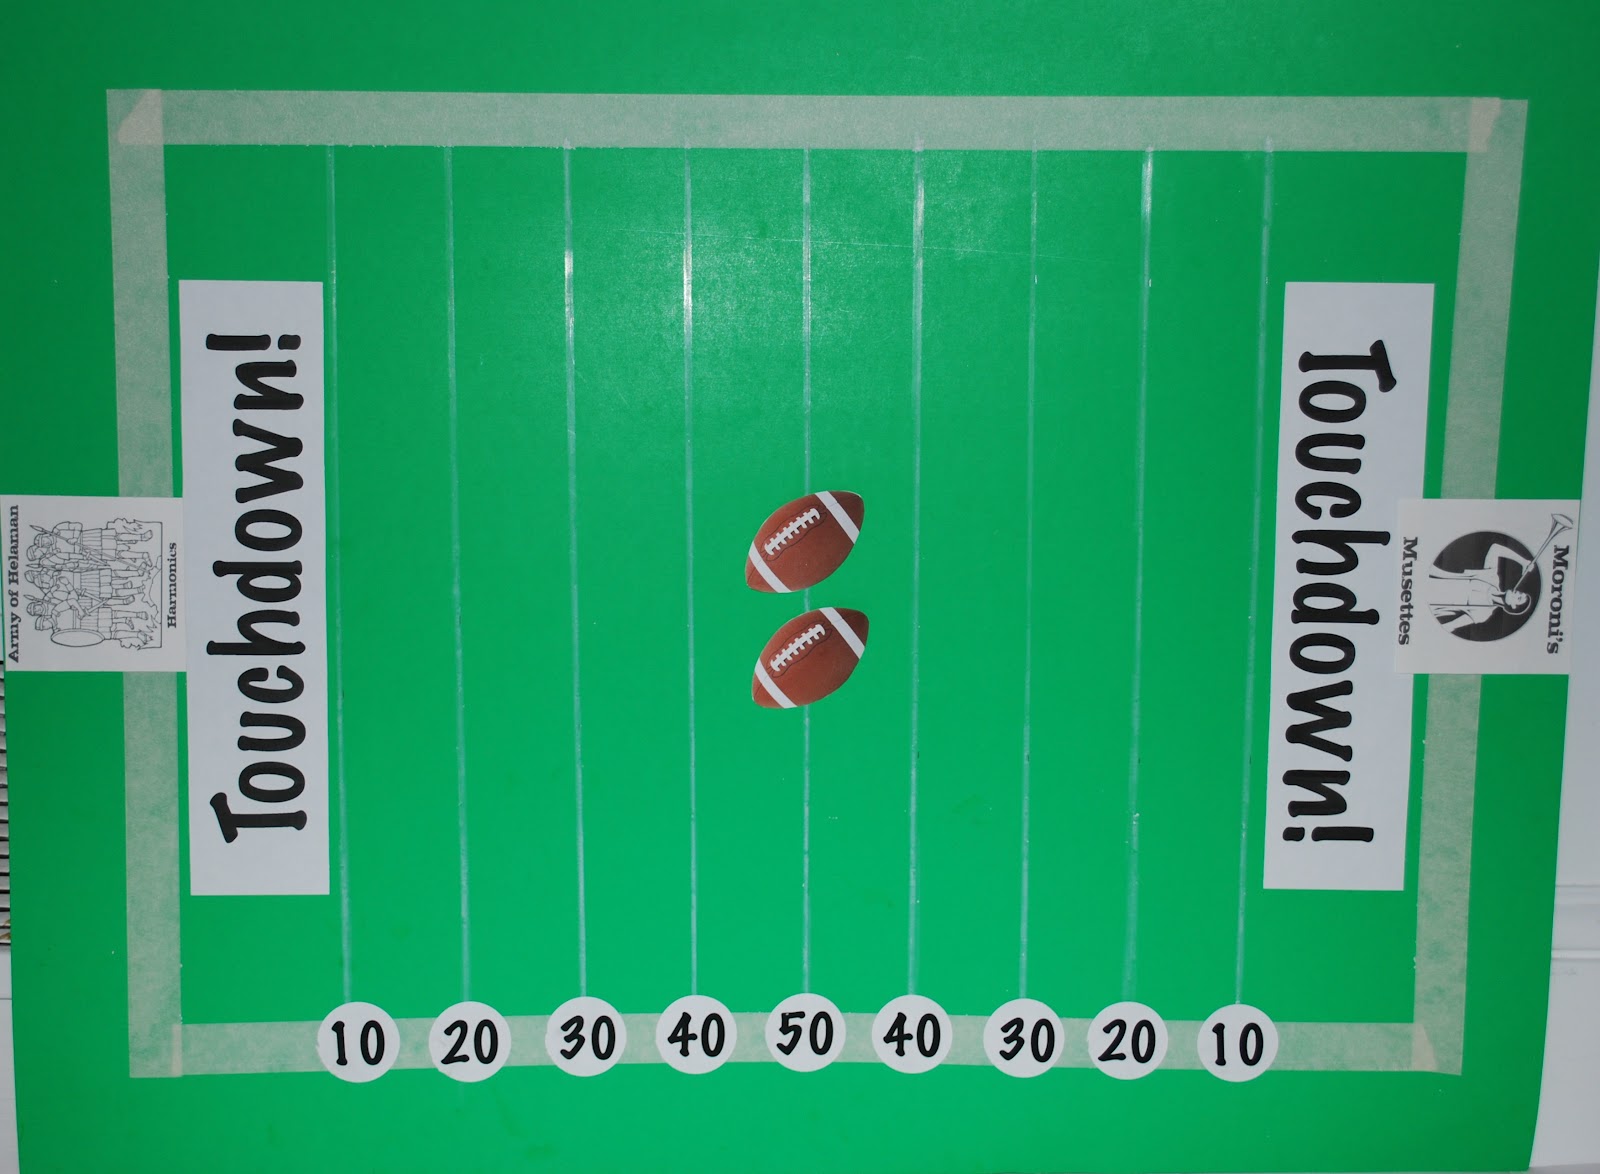 clipart of a football field - photo #27